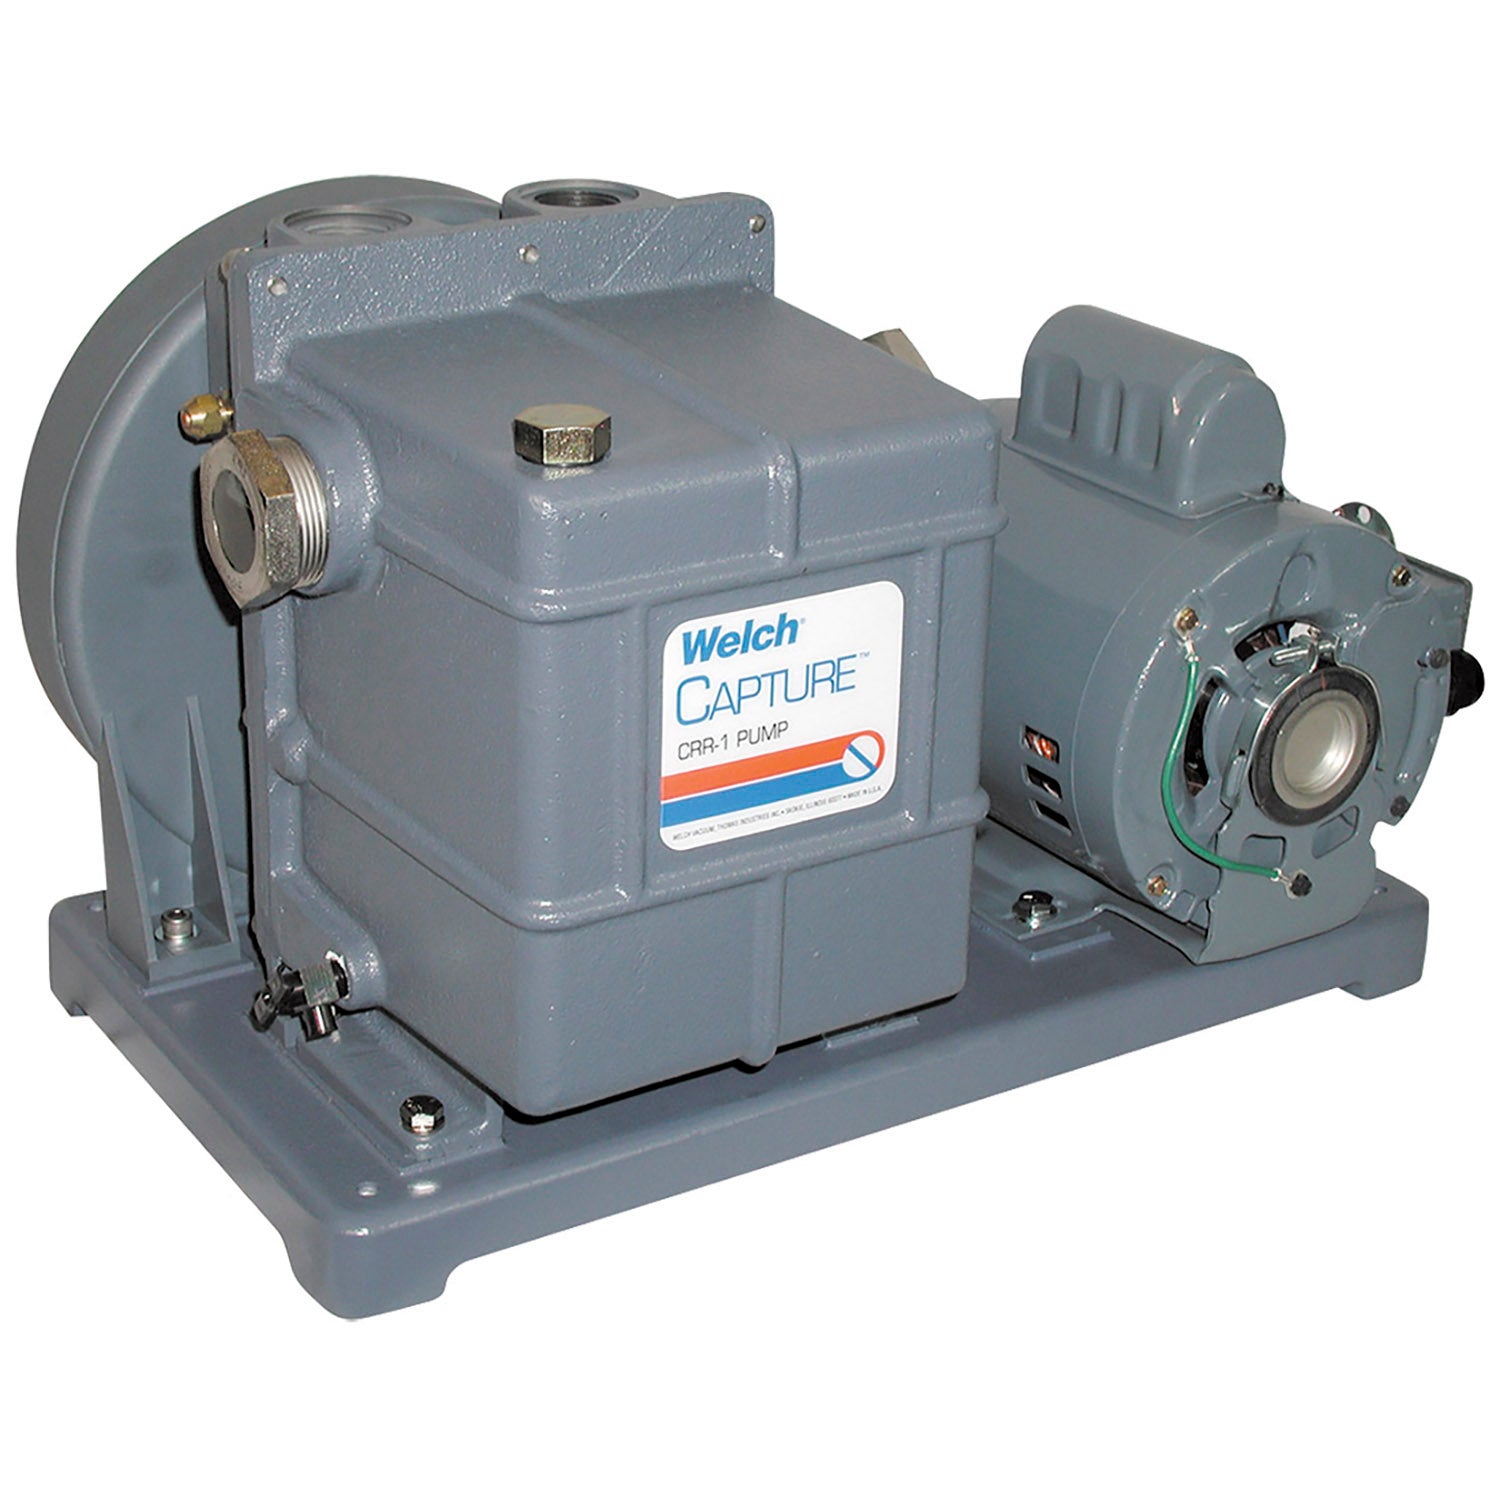 Welch CRR-1A Capture Refrigerant Recovery Vacuum Pump